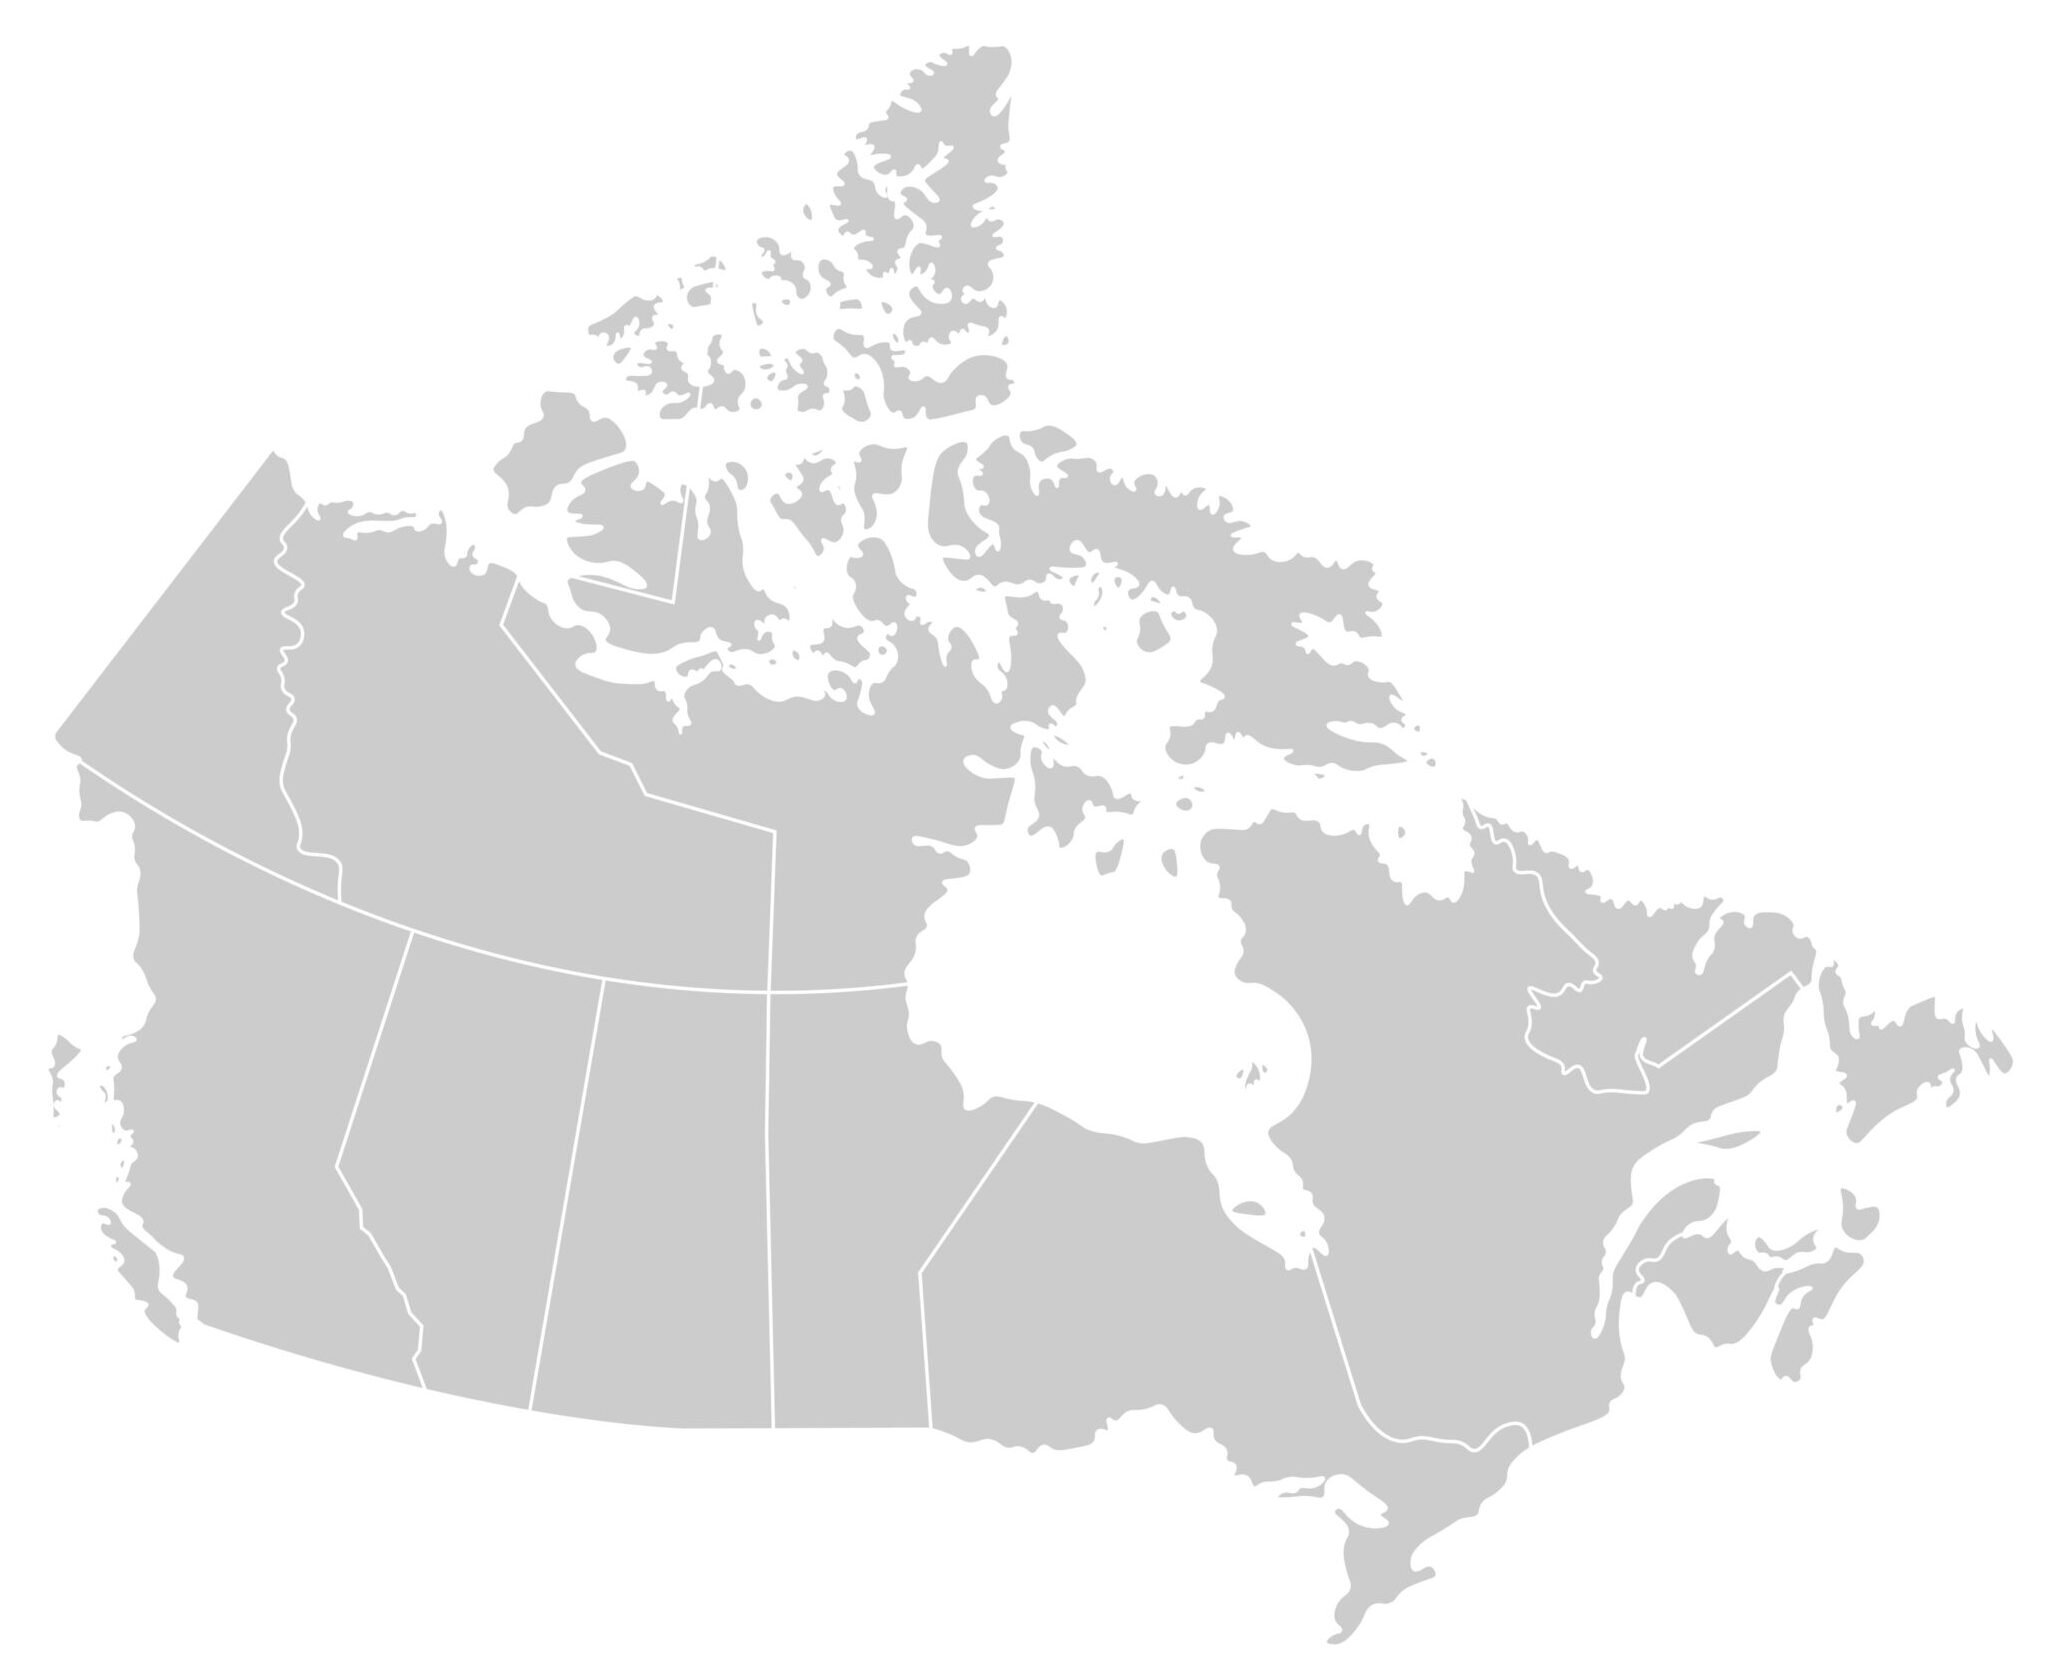 Vector isolated illustration of simplified administrative map of Canada. Borders of the provinces (regions). Grey silhouettes. White outline.